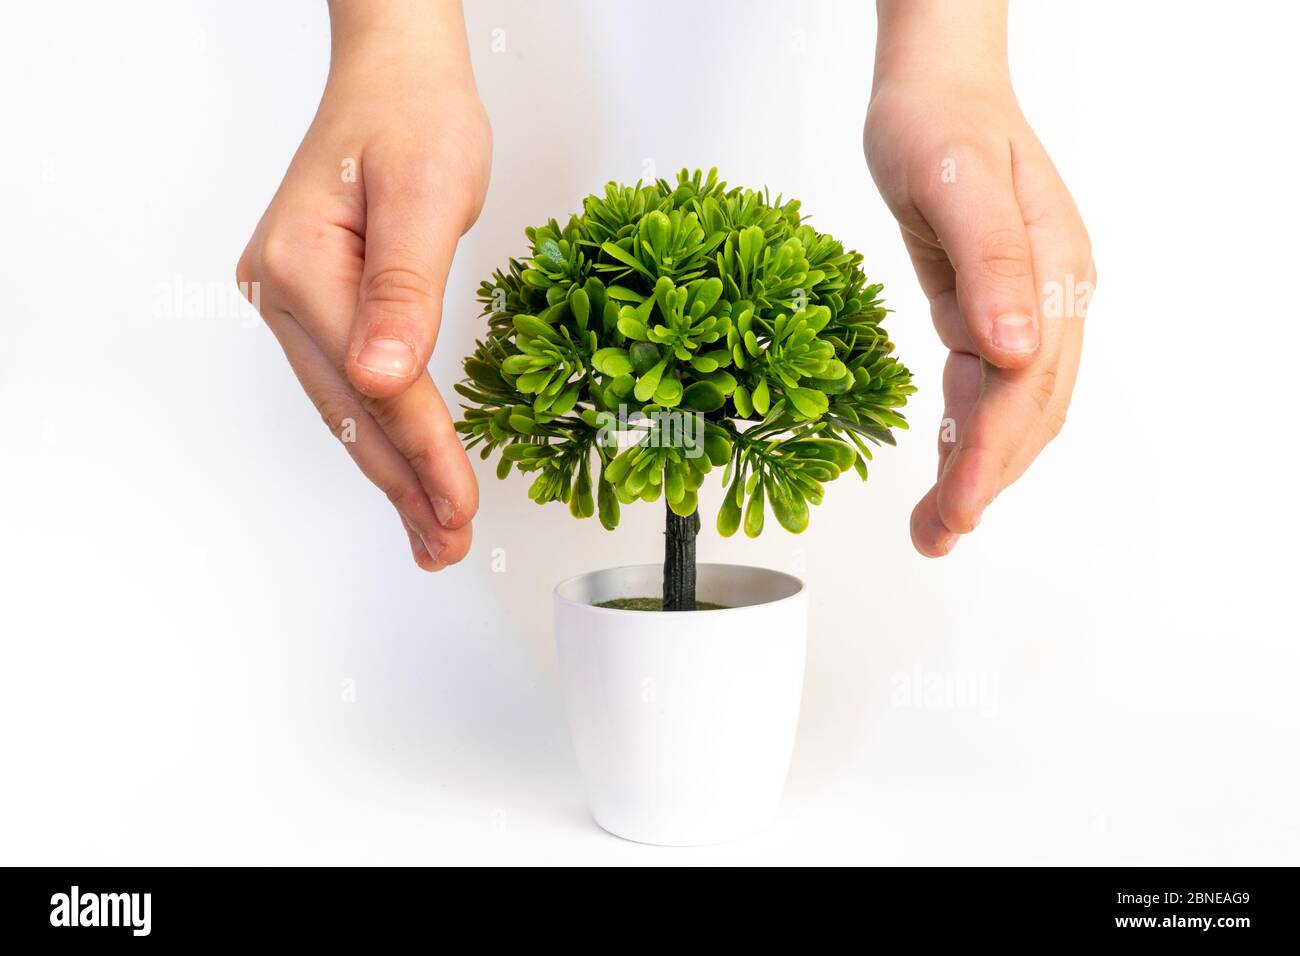 Save the planet. Small plant cupped in child's hands. Ecology concept Stock Photo